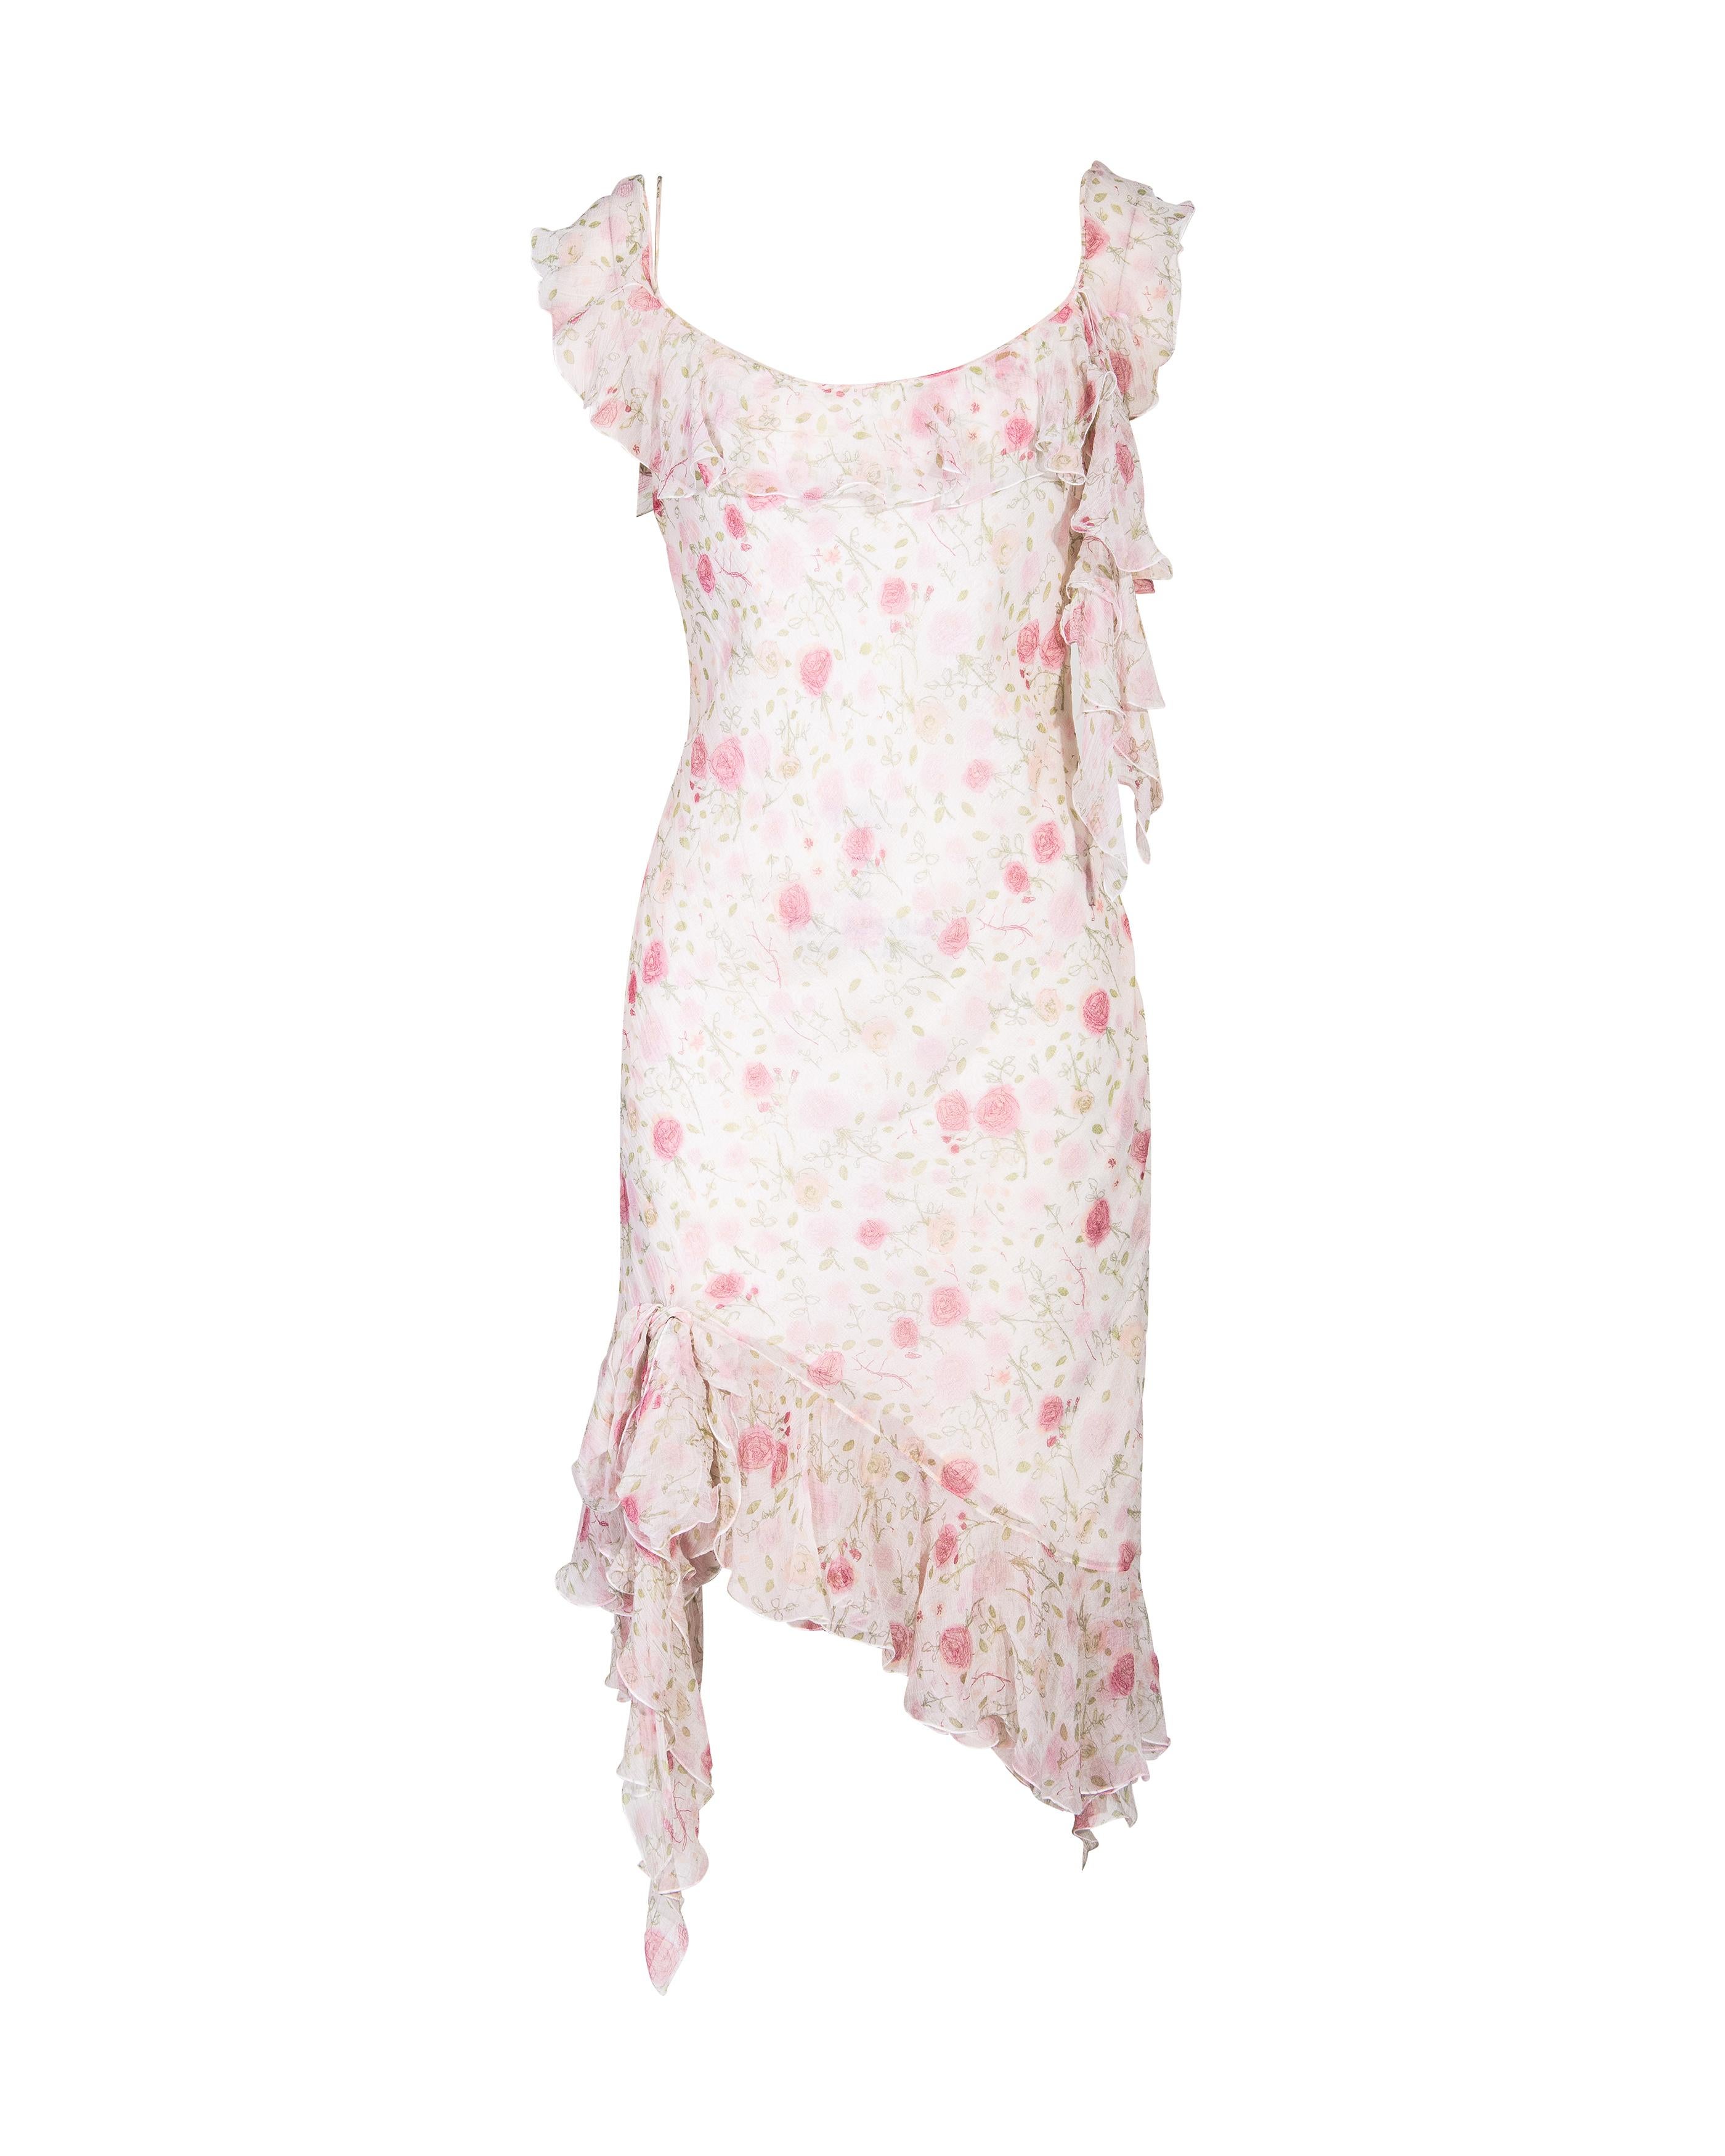 S/S 1999 Christian Dior by John Galliano Rose Print Bias Cut Silk Chiffon Dress In Good Condition In North Hollywood, CA